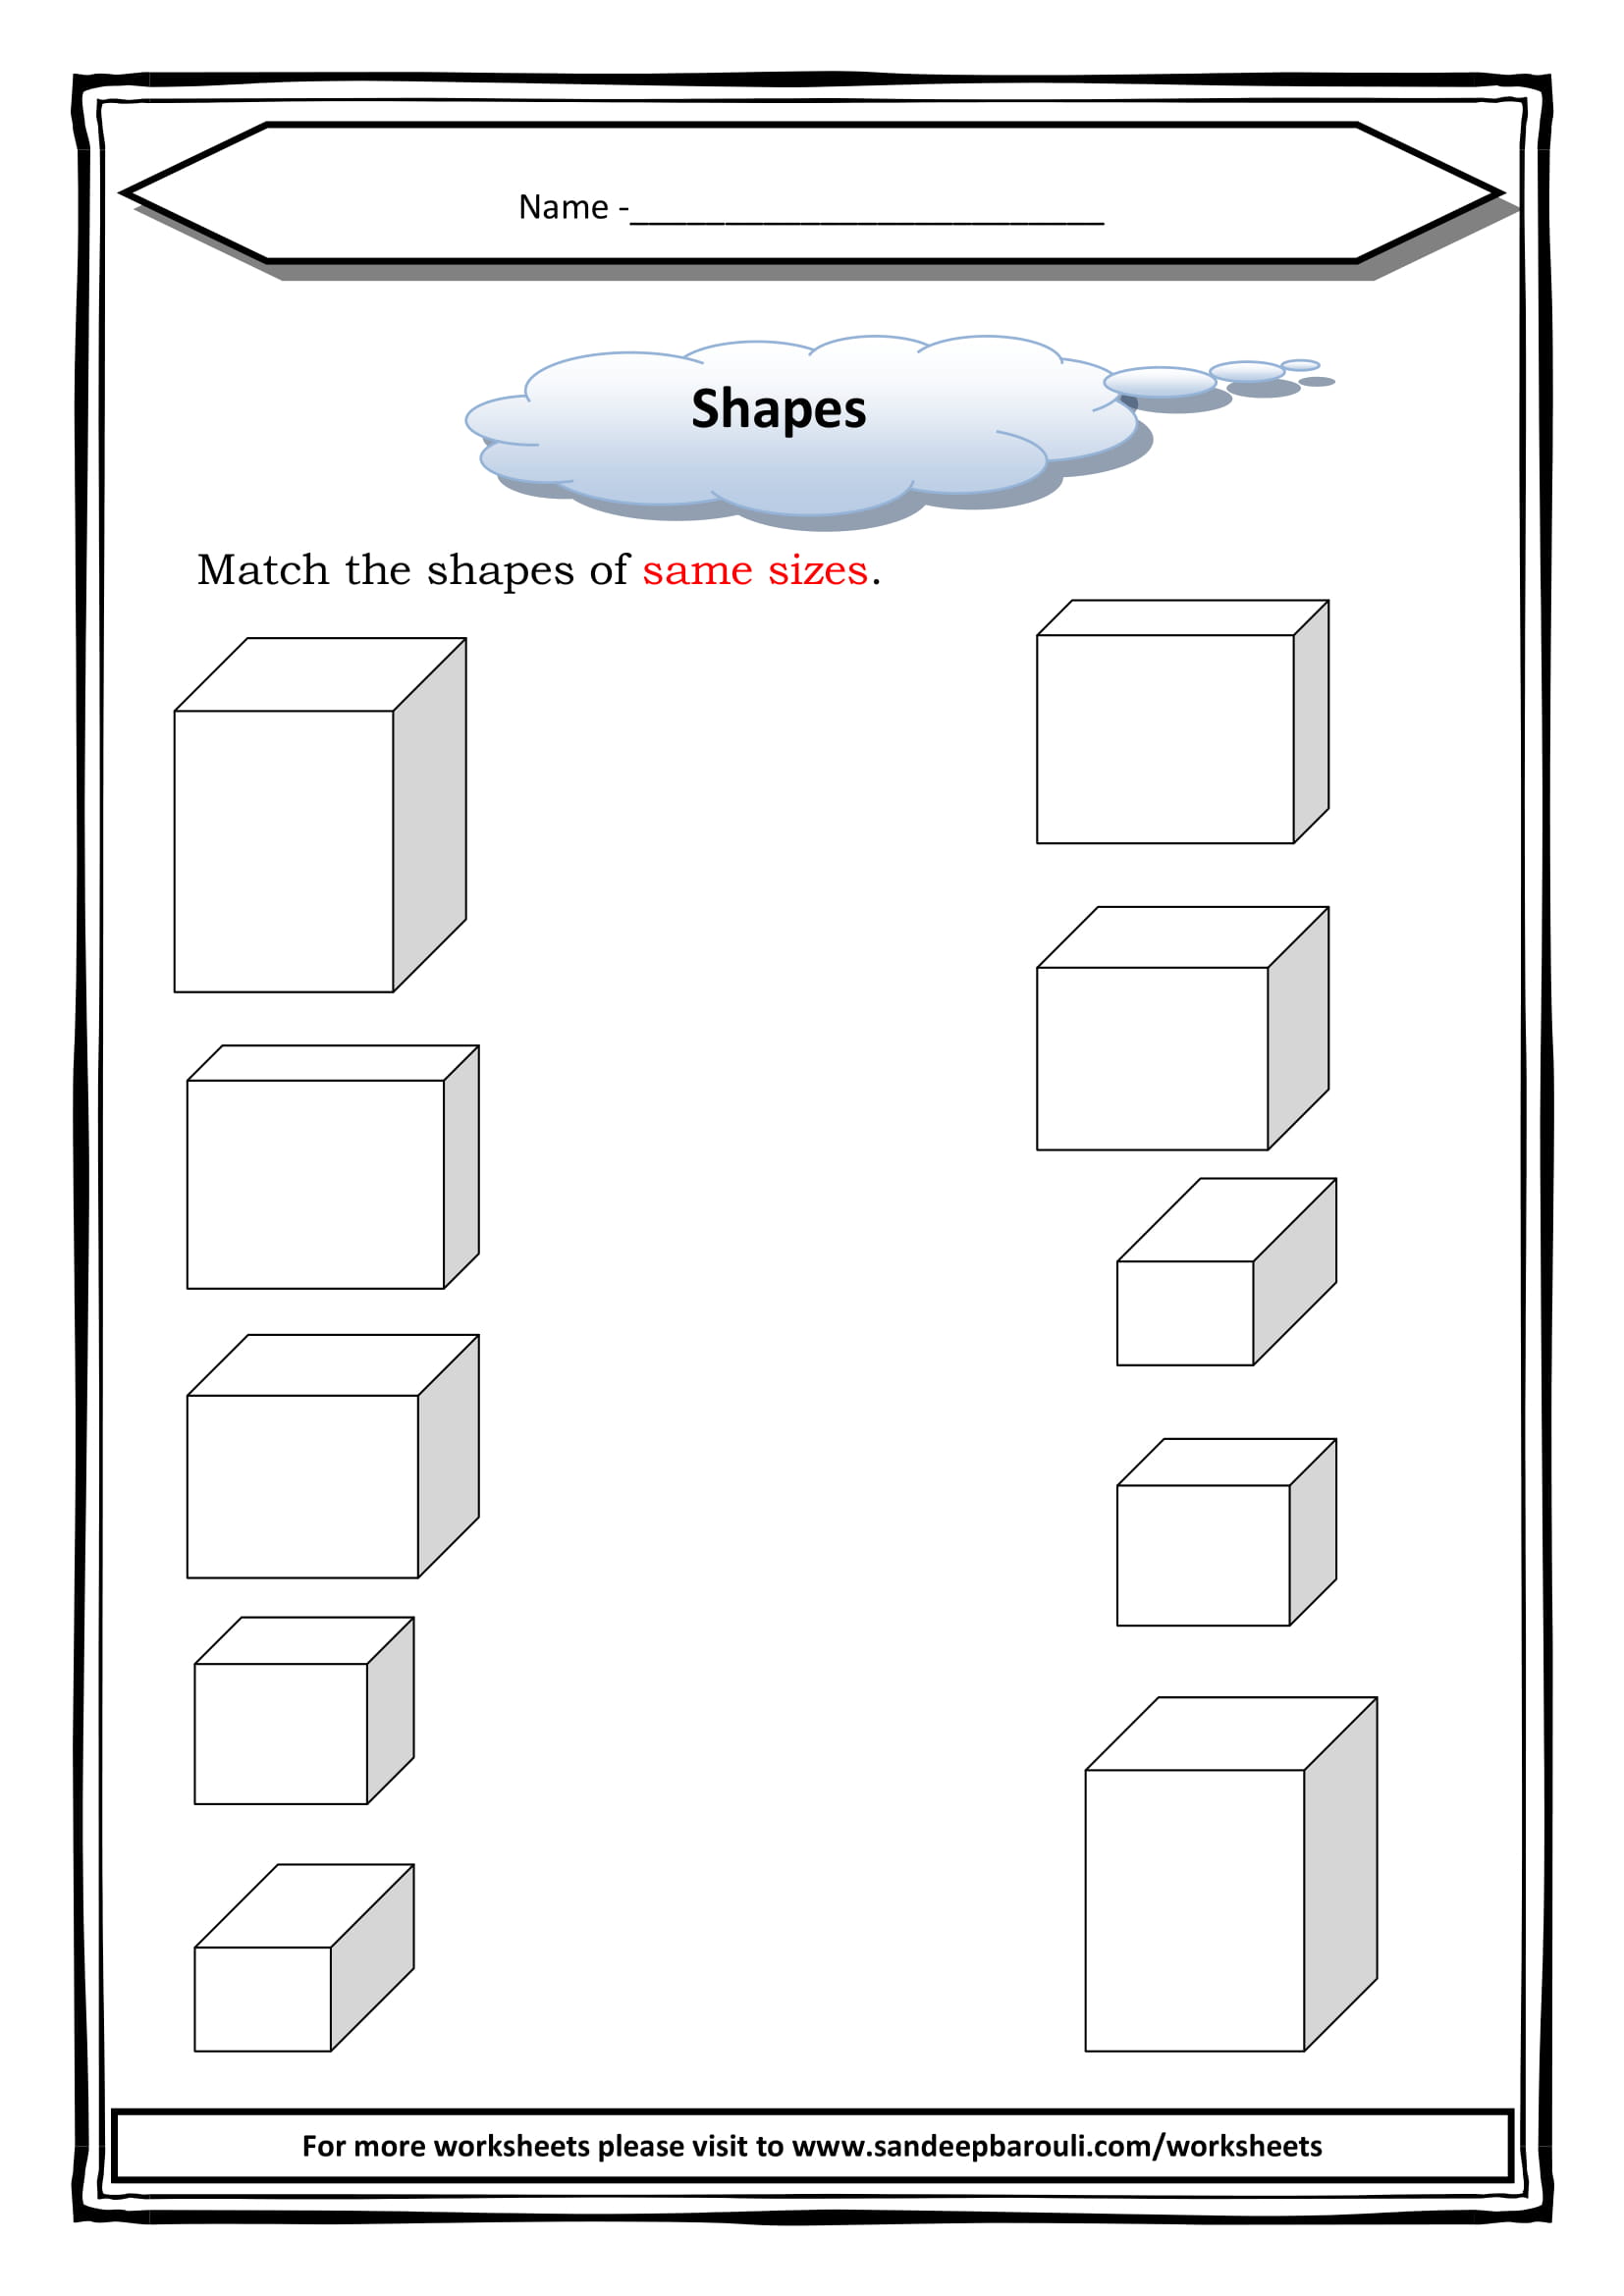 Match-the-shapes-of-same-sizes-Worksheet-for-class-1